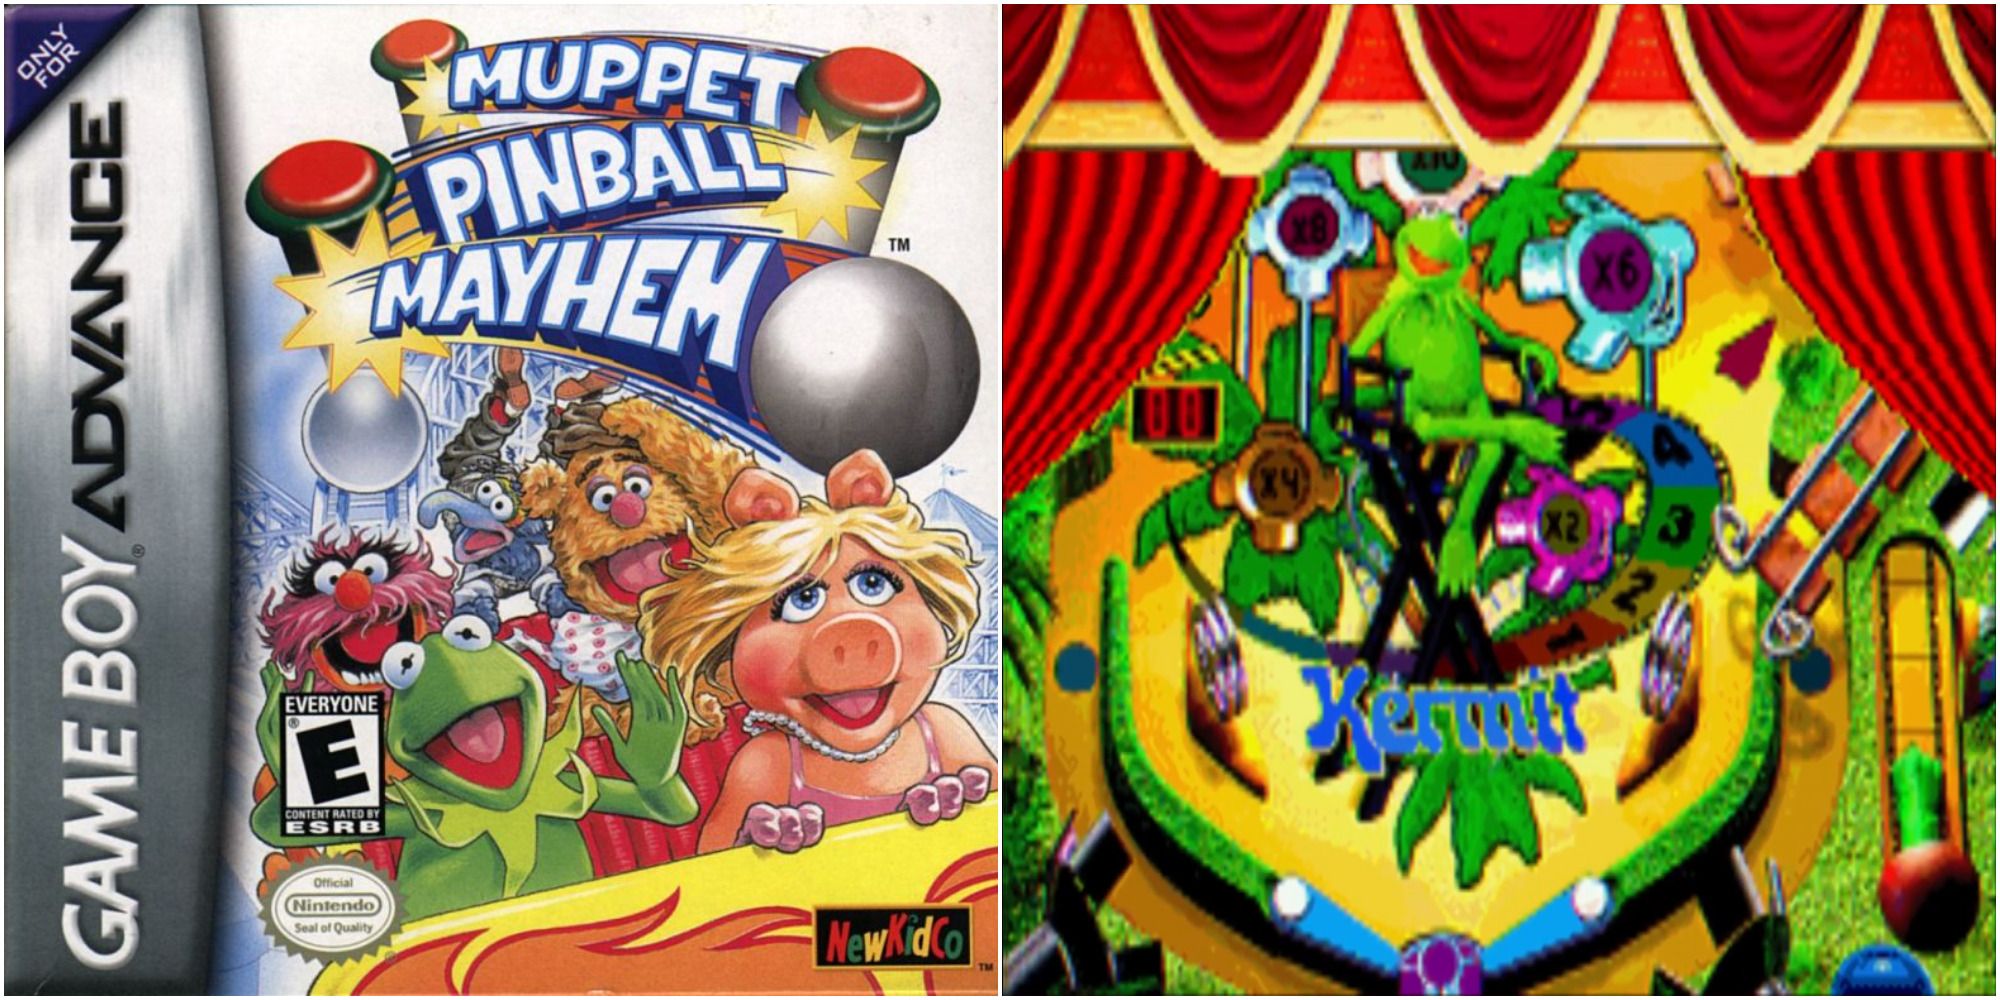 Muppet Pinball Mayhem split image Kermit the frog, Fozzie Bear, Miss Piggy, Gonzo, and Animal on a roller coaster and in-game Kermit pinball table